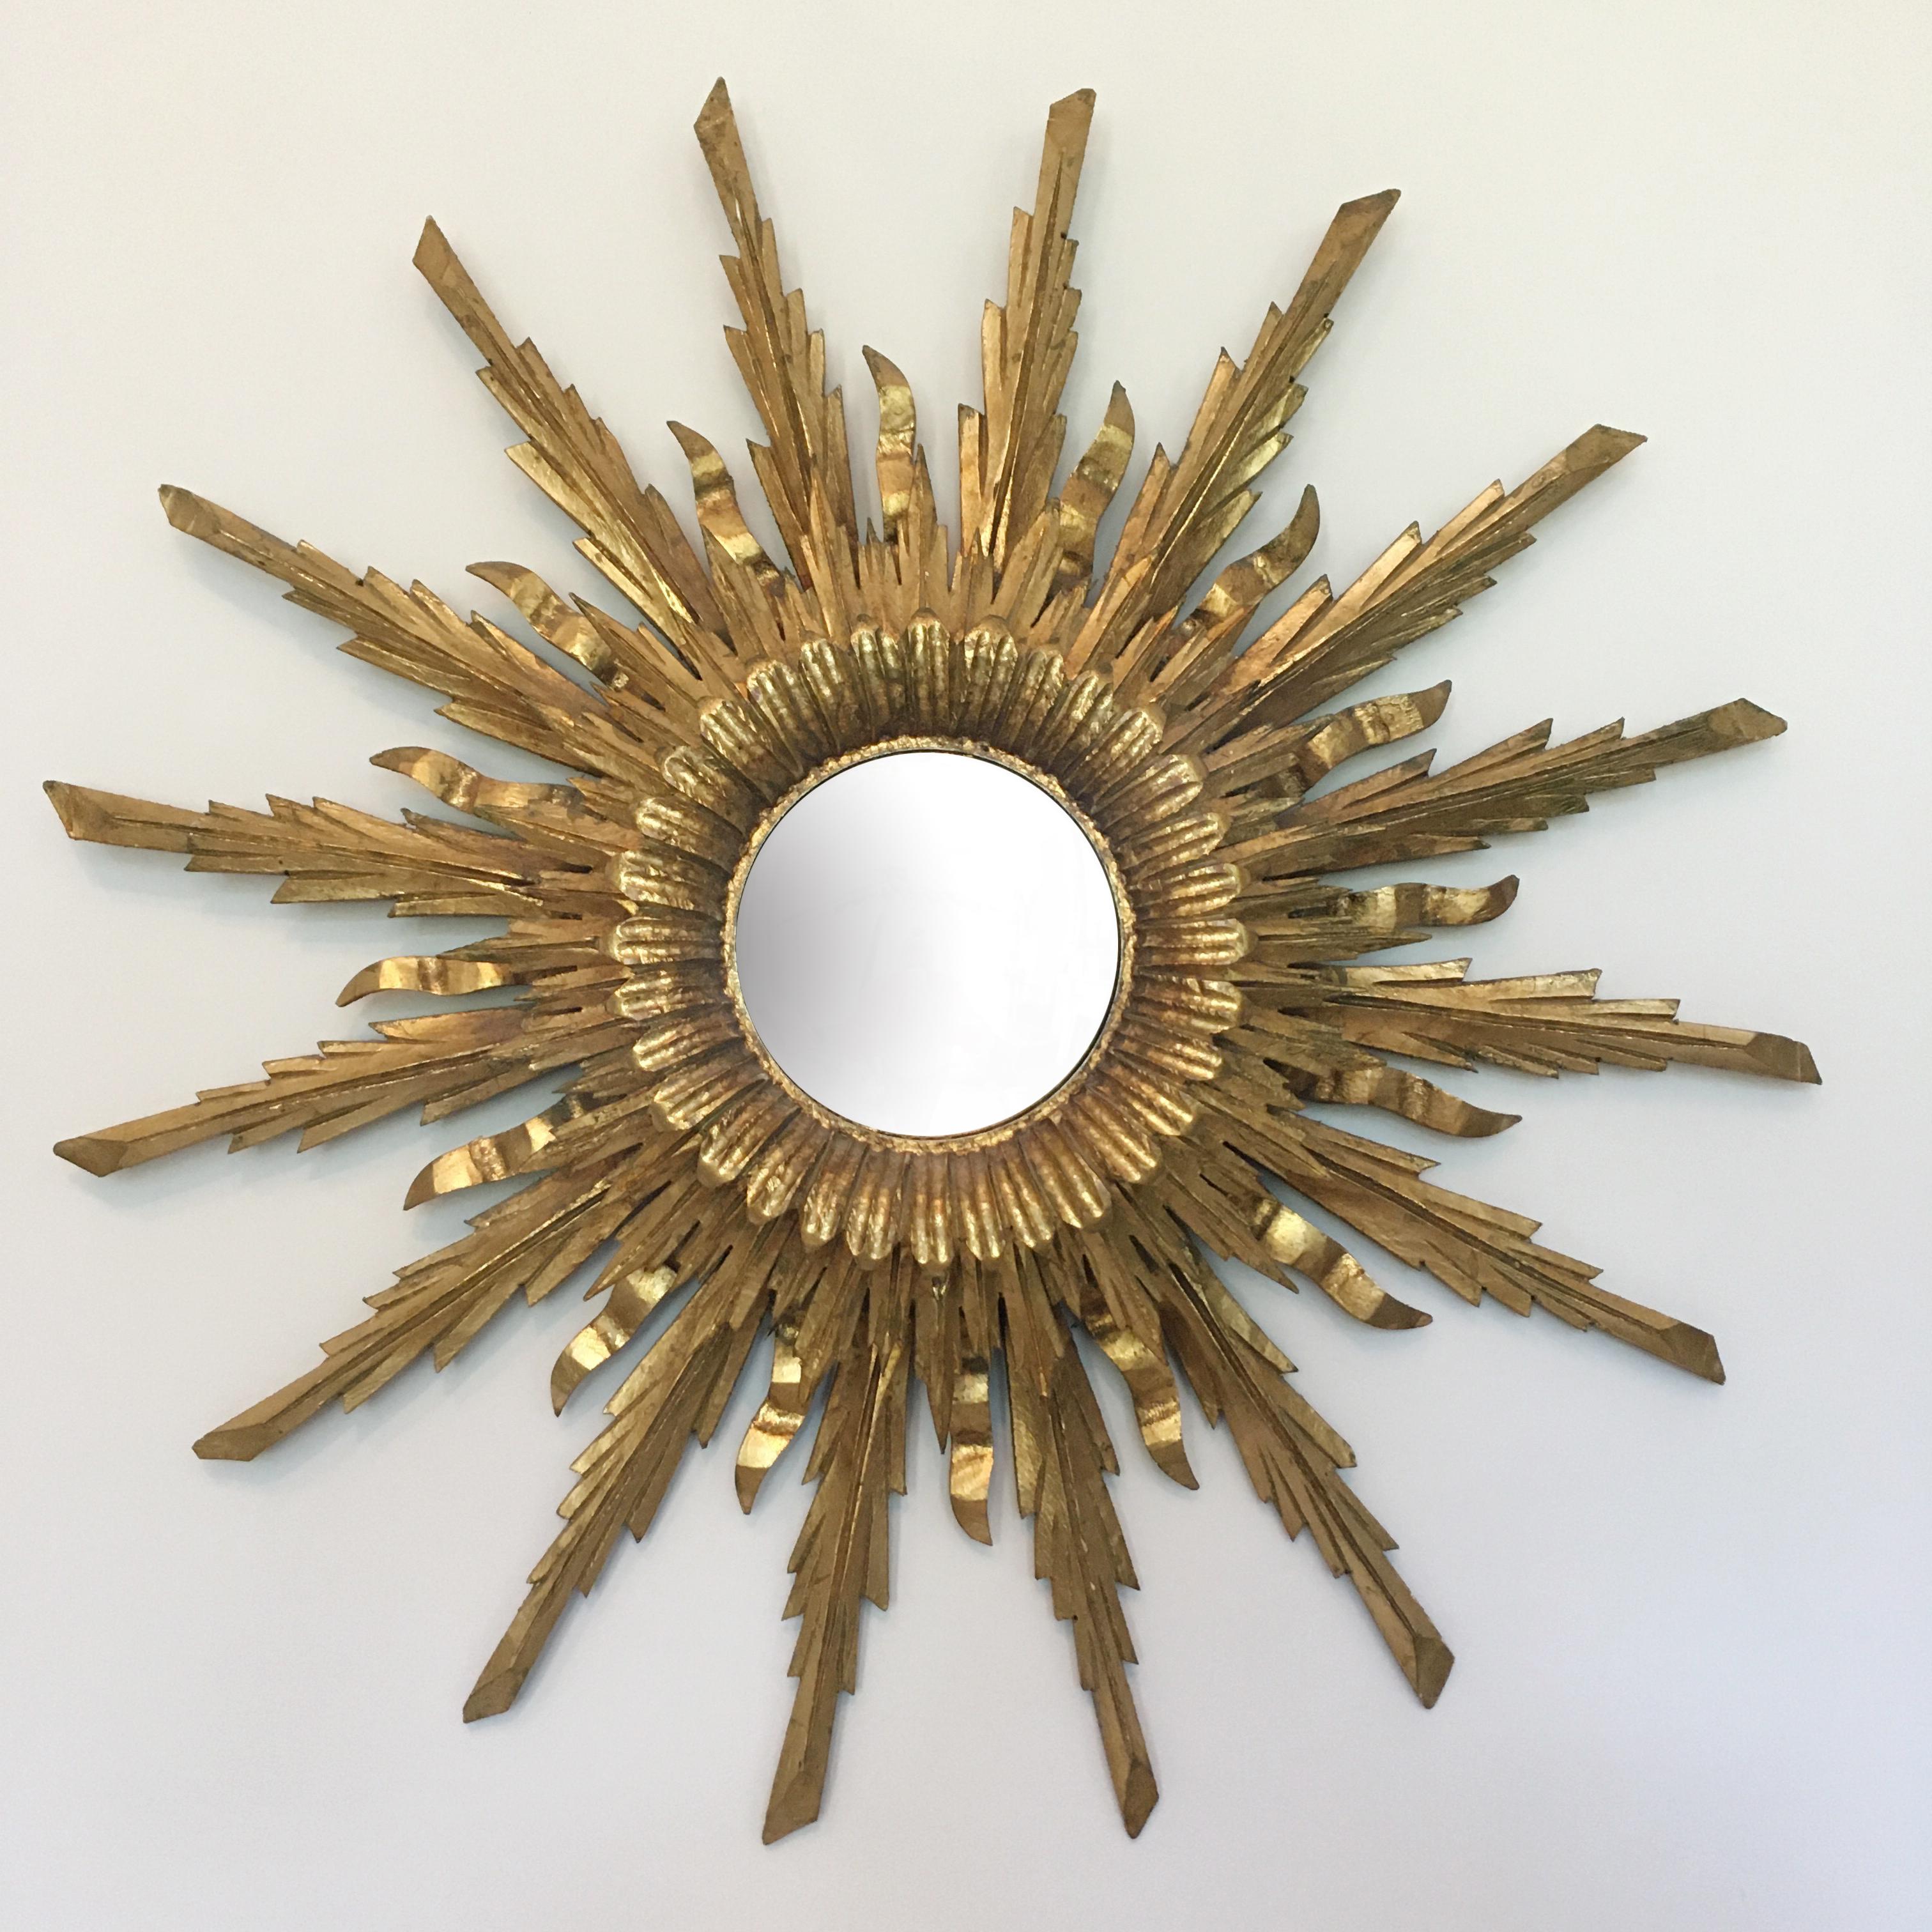 Spanish handcrafted triple layer wooden sunburst mirror with lights
Beautiful triple layers of wooden handcrafted gilt rays
circa 1930s
Original convex mirror
The glow of the backlighting is incredible
Hand carved wood with original gilt